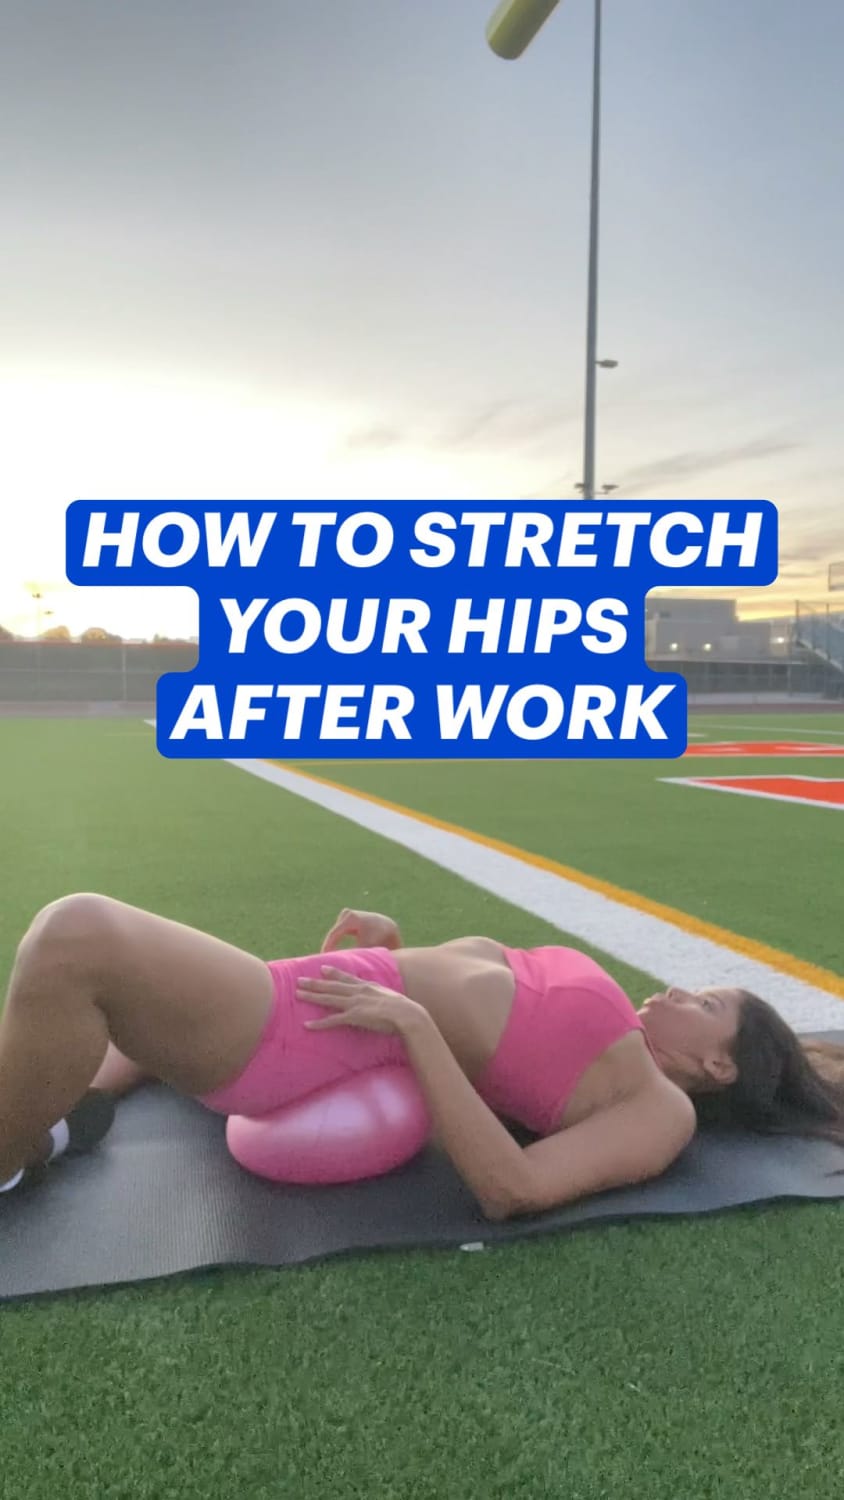 HOW TO STRETCH YOUR HIPS AFTER WORK